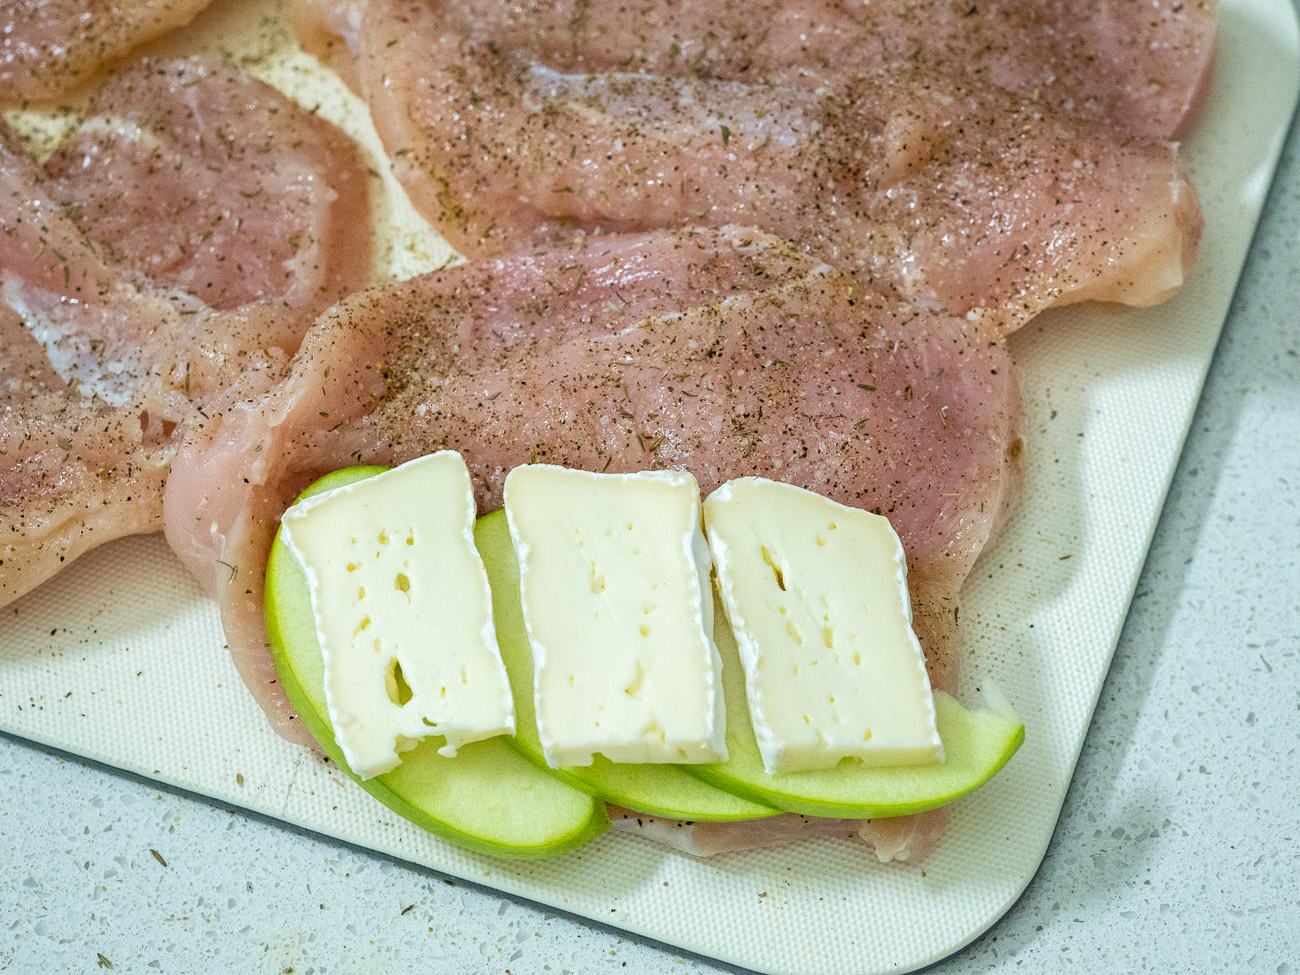 Sprinkle insides of chicken breasts with salt, black pepper, and thyme. Top with apple slices and brie cheese slices, using about 3 slices of each for each chicken breast. Fold each chicken breast over to close it up.